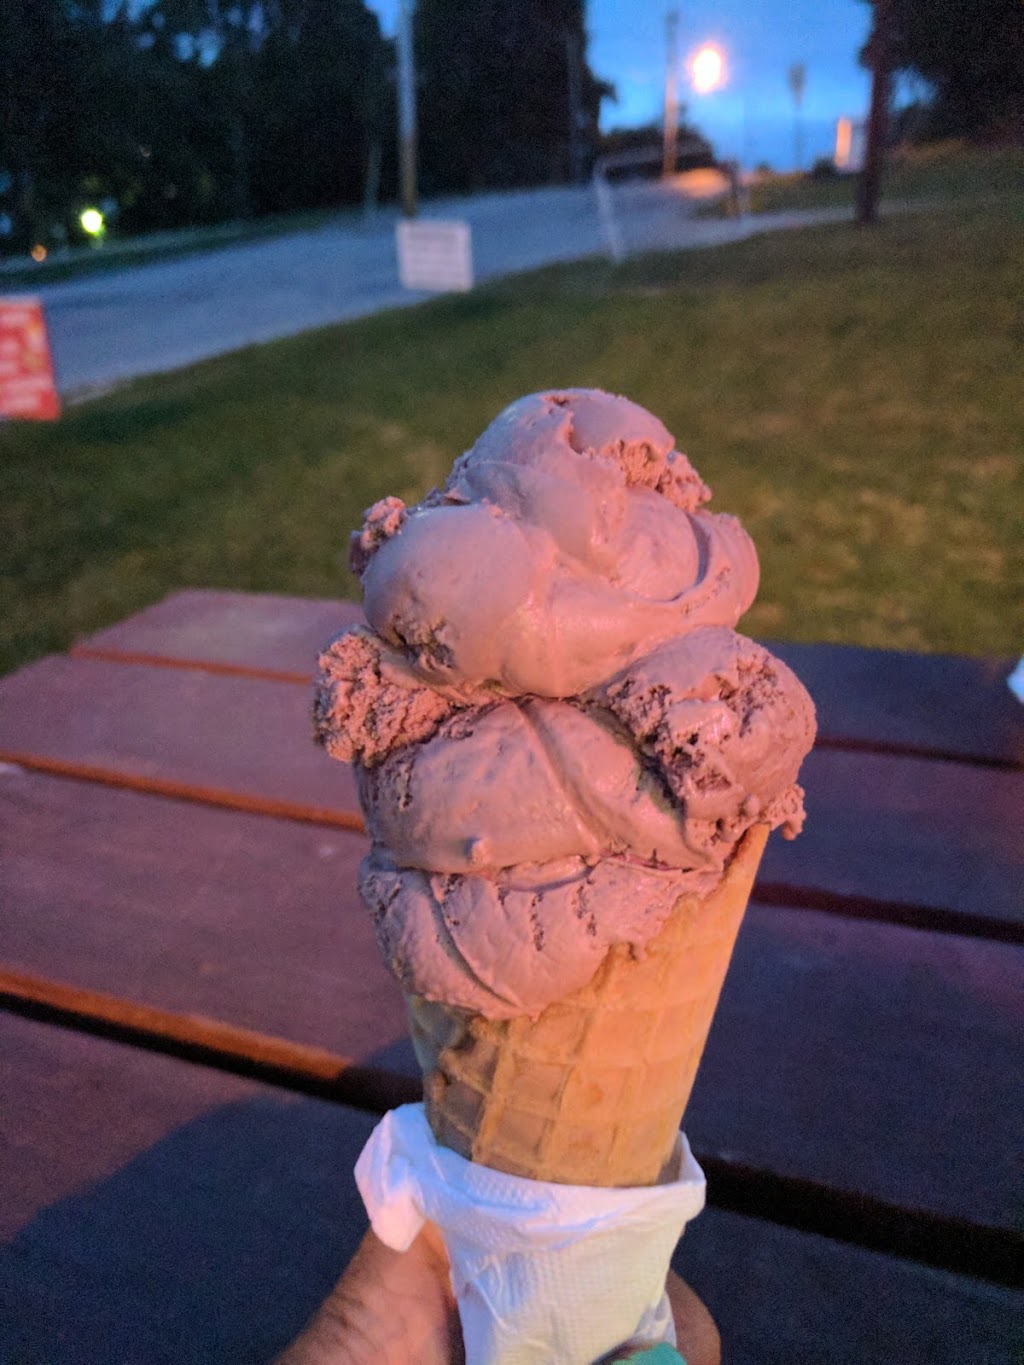 Yoders Red Barn Ice Cream | 428 Parkside Dr, Ashland, OH 44805 | Phone: (419) 282-6277